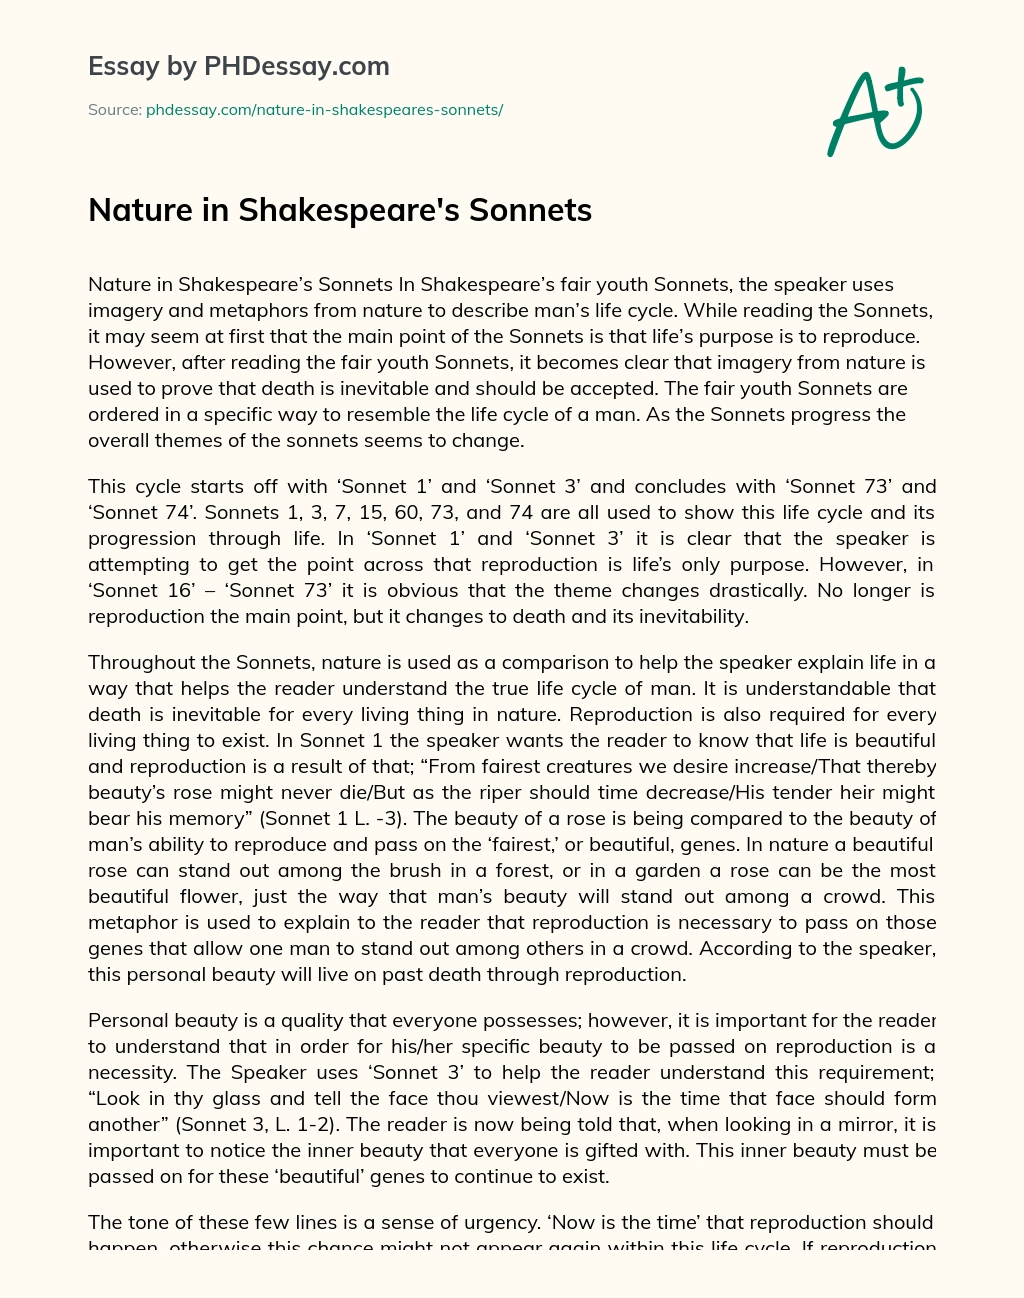 Nature in Shakespeare’s Sonnets essay